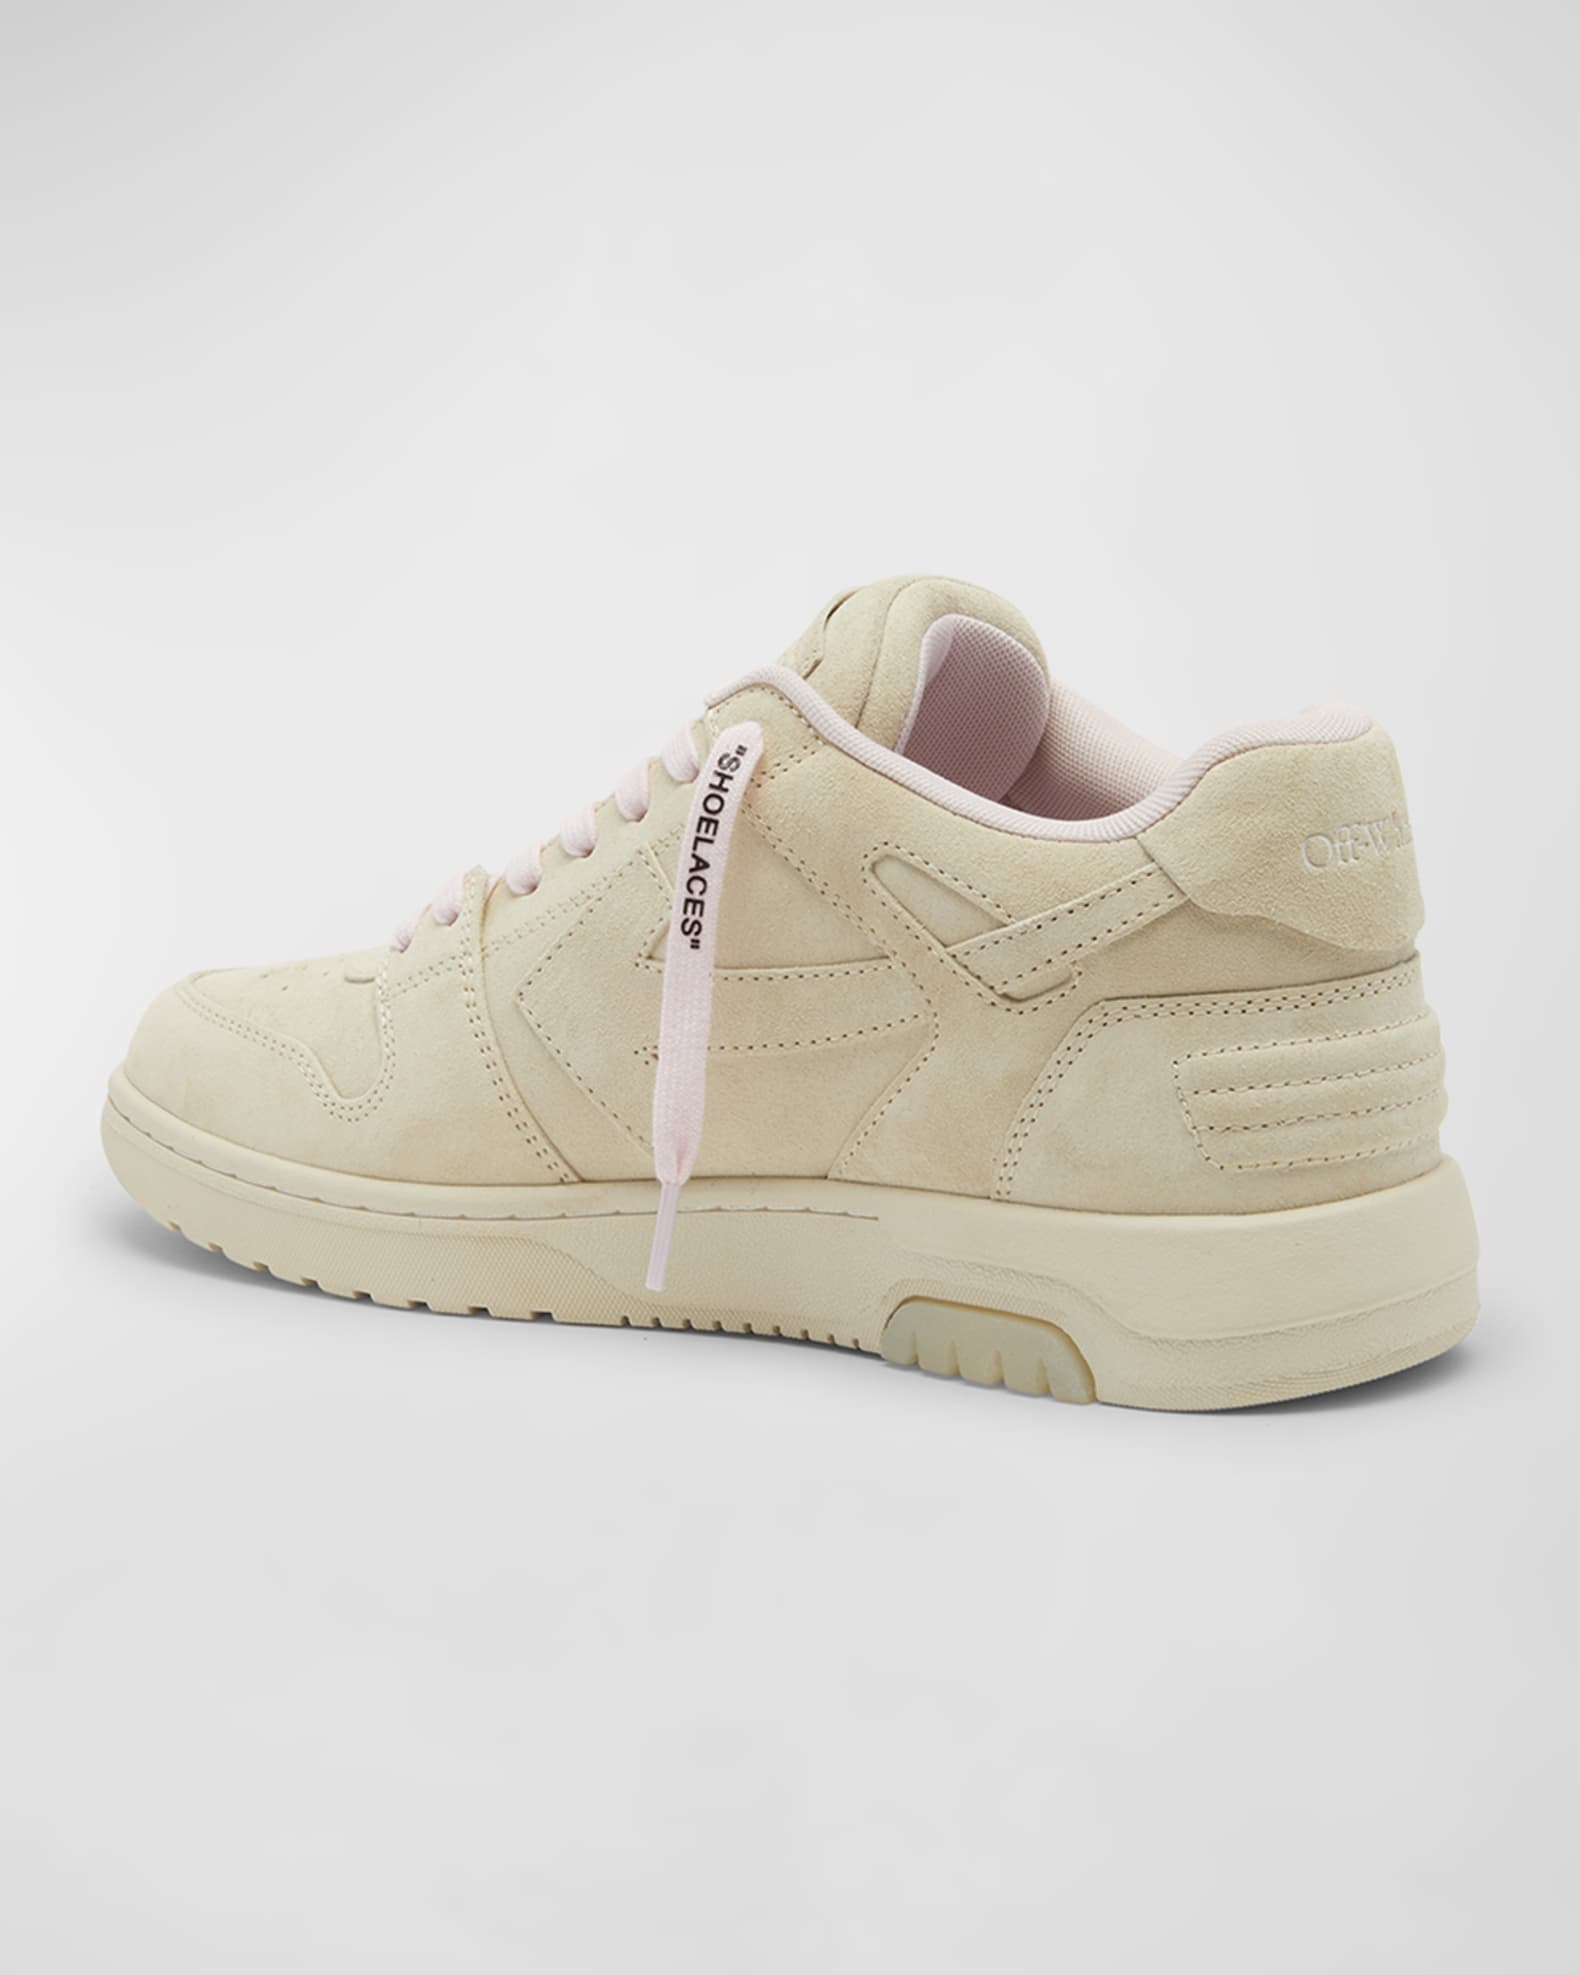 Medic regering Berygtet Off-White Out Of Office Arrow Suede Sneakers | Neiman Marcus